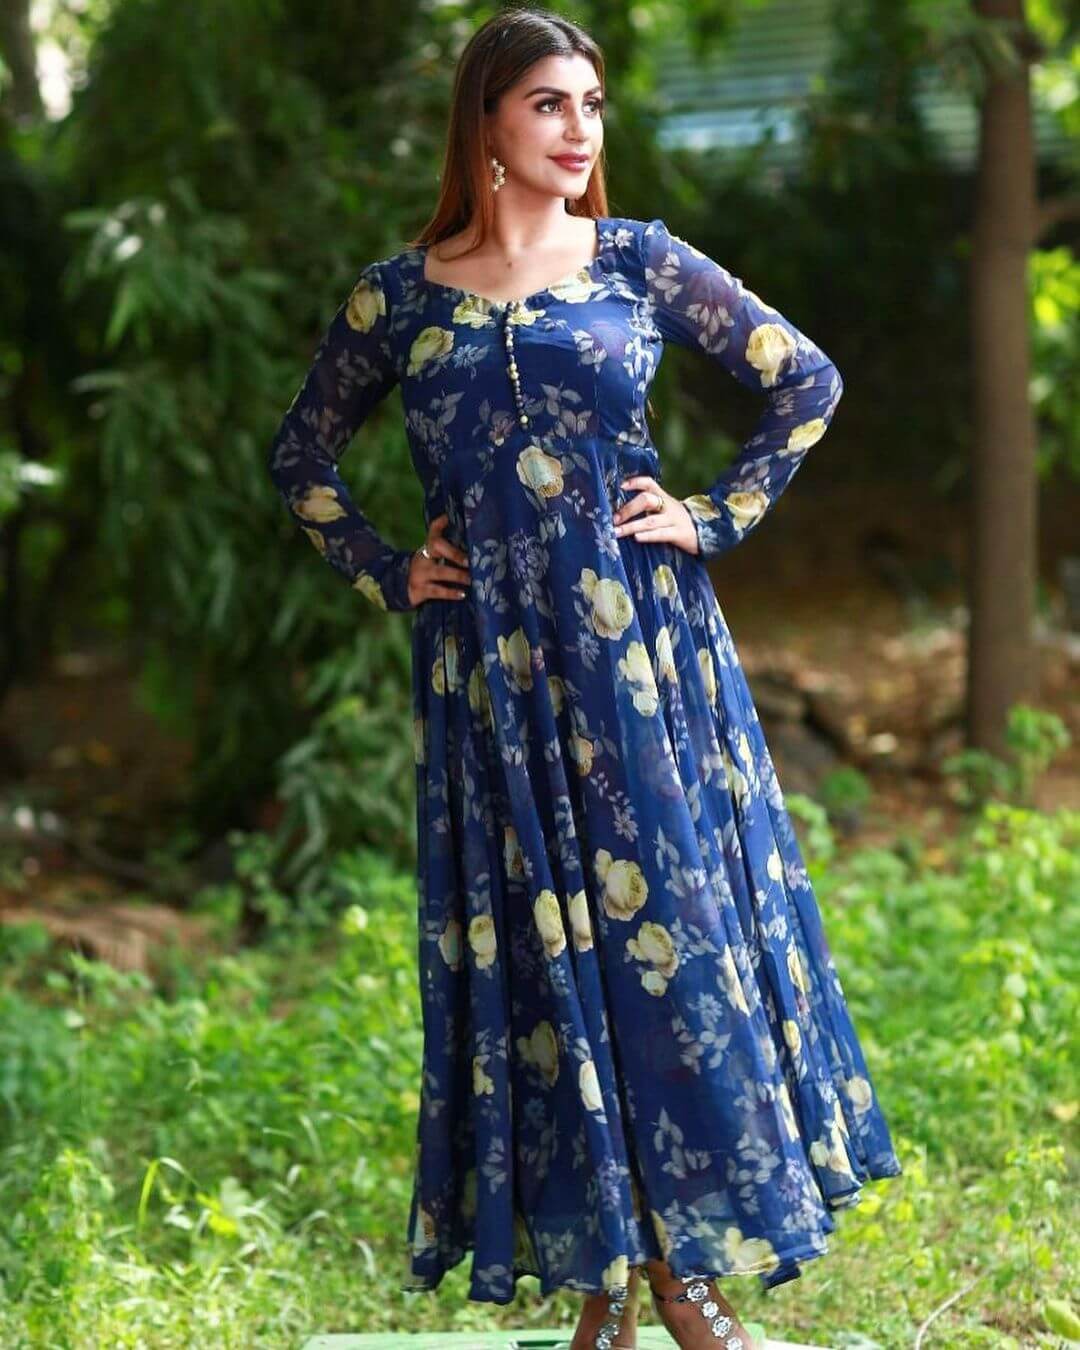 Yashika Aannand Look Pretty In Blue Flora Print Maxi Dress Glamorous Outfits & Looks